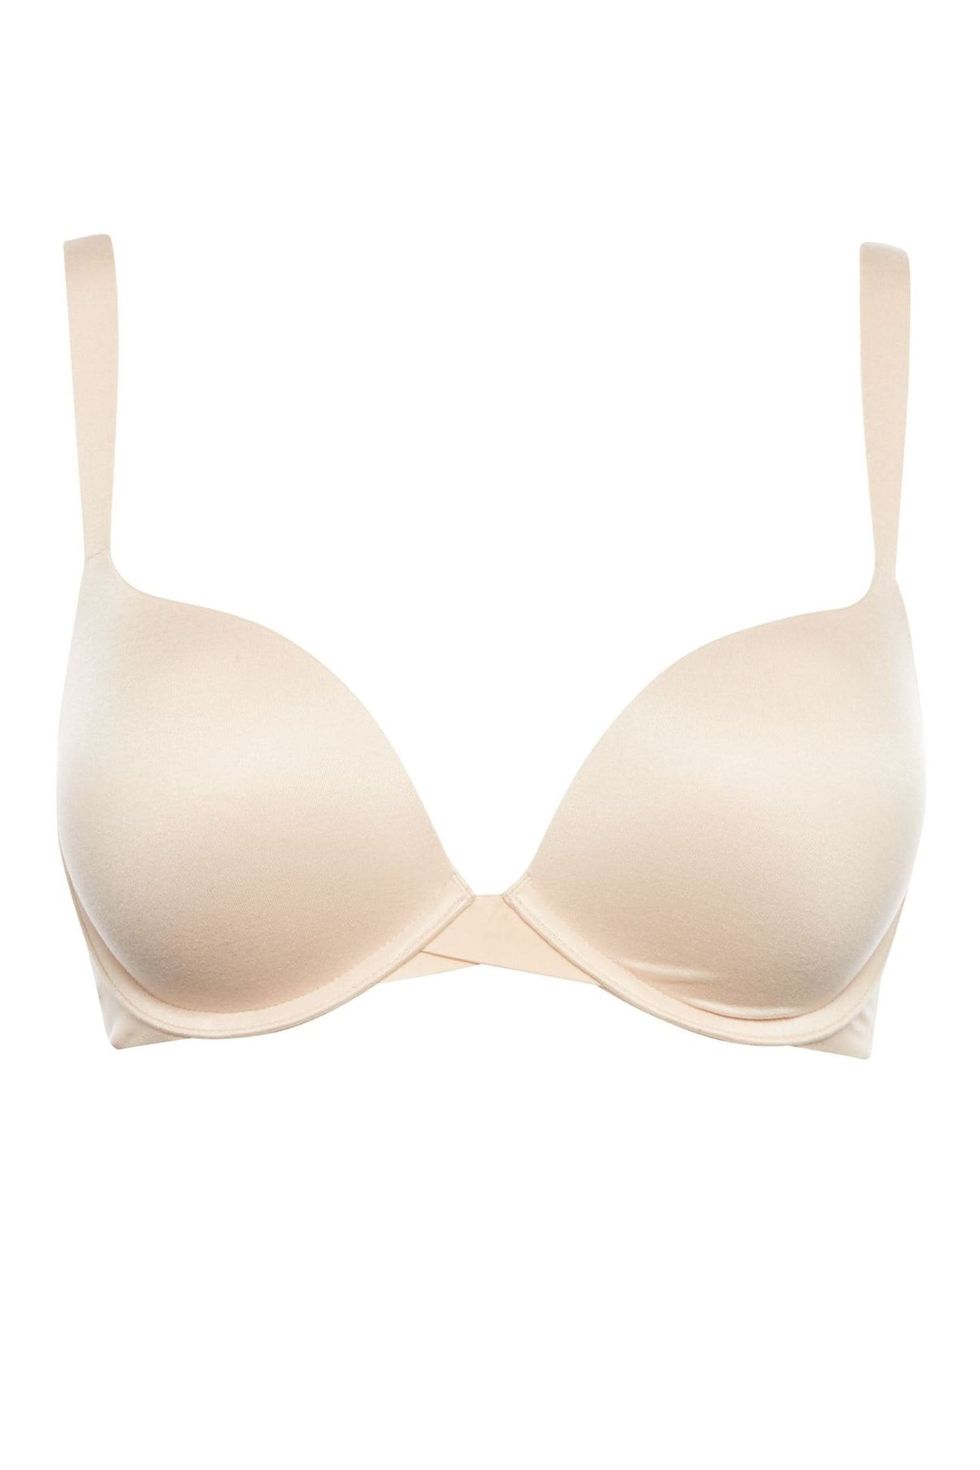 The boldest innovation to our revolutionary push-up bra: the